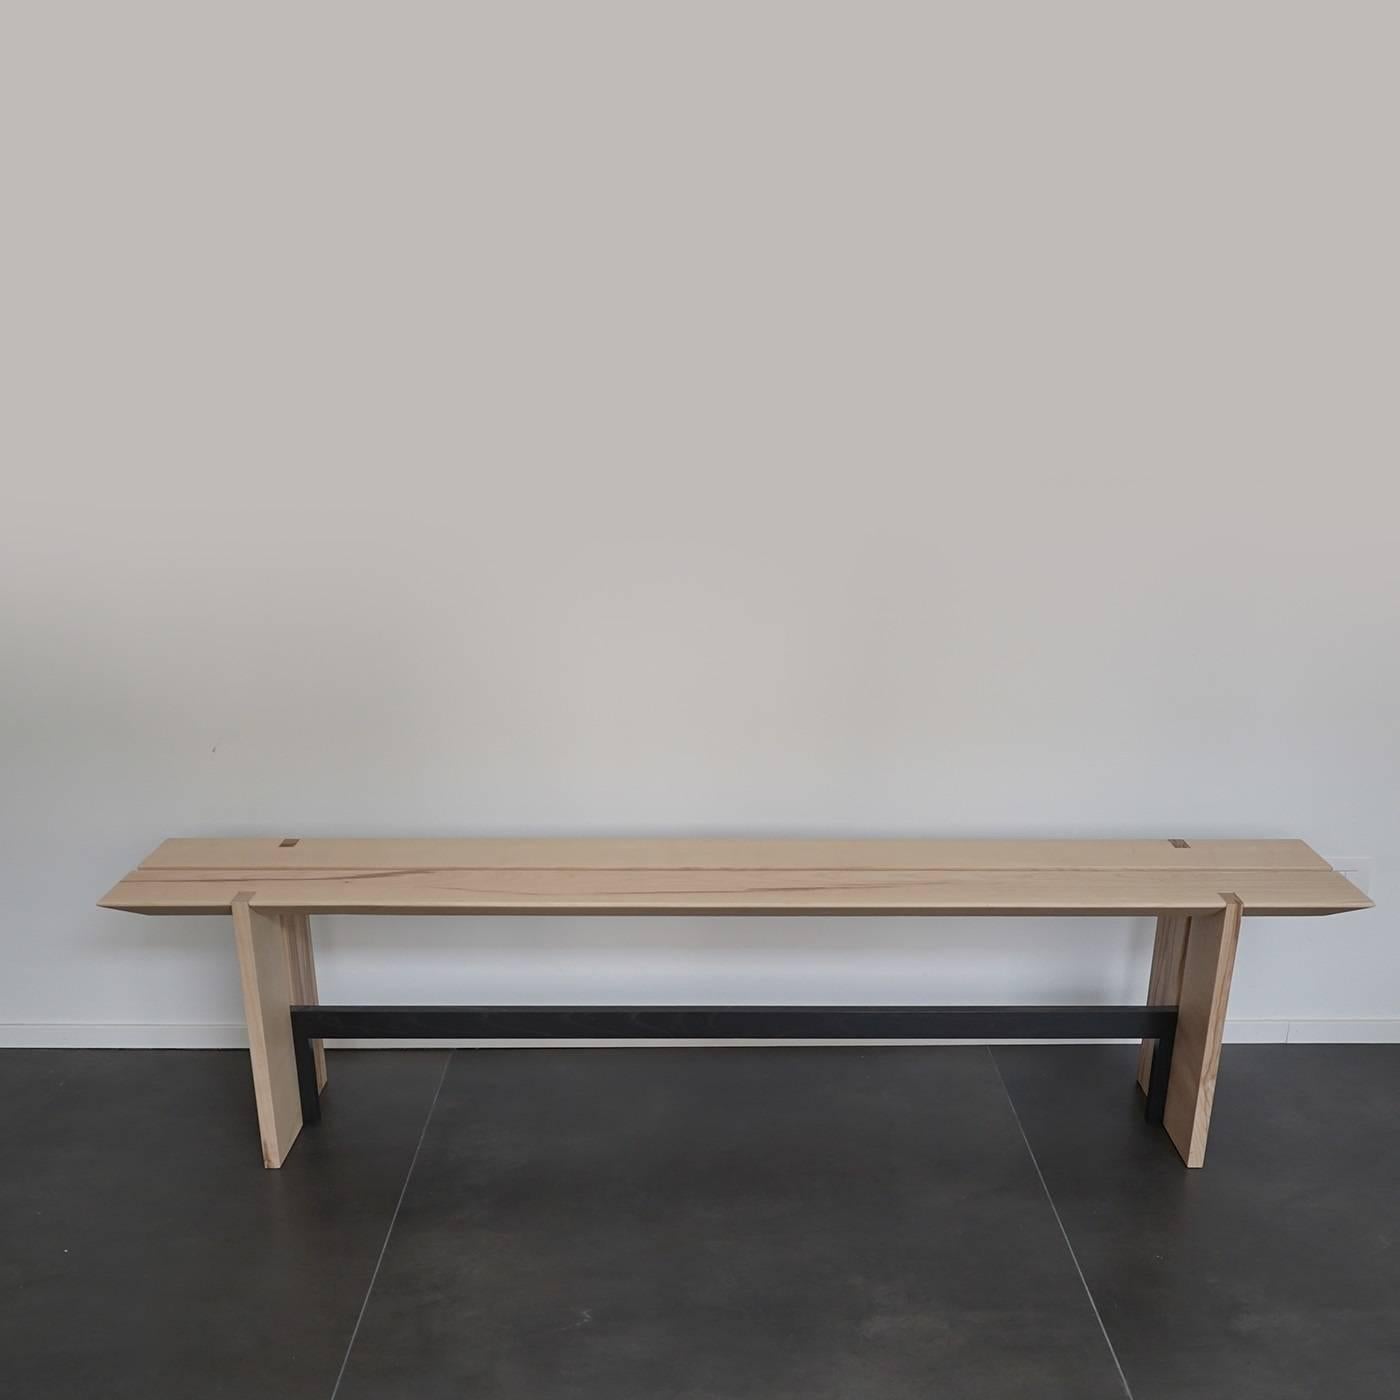 A modern, minimalist piece made of natural hardwood and iron whose design accentuates the beauty of simple shapes and mixes two materials. This stunning piece features two planks supported by a base in iron with black matte finish whose legs are